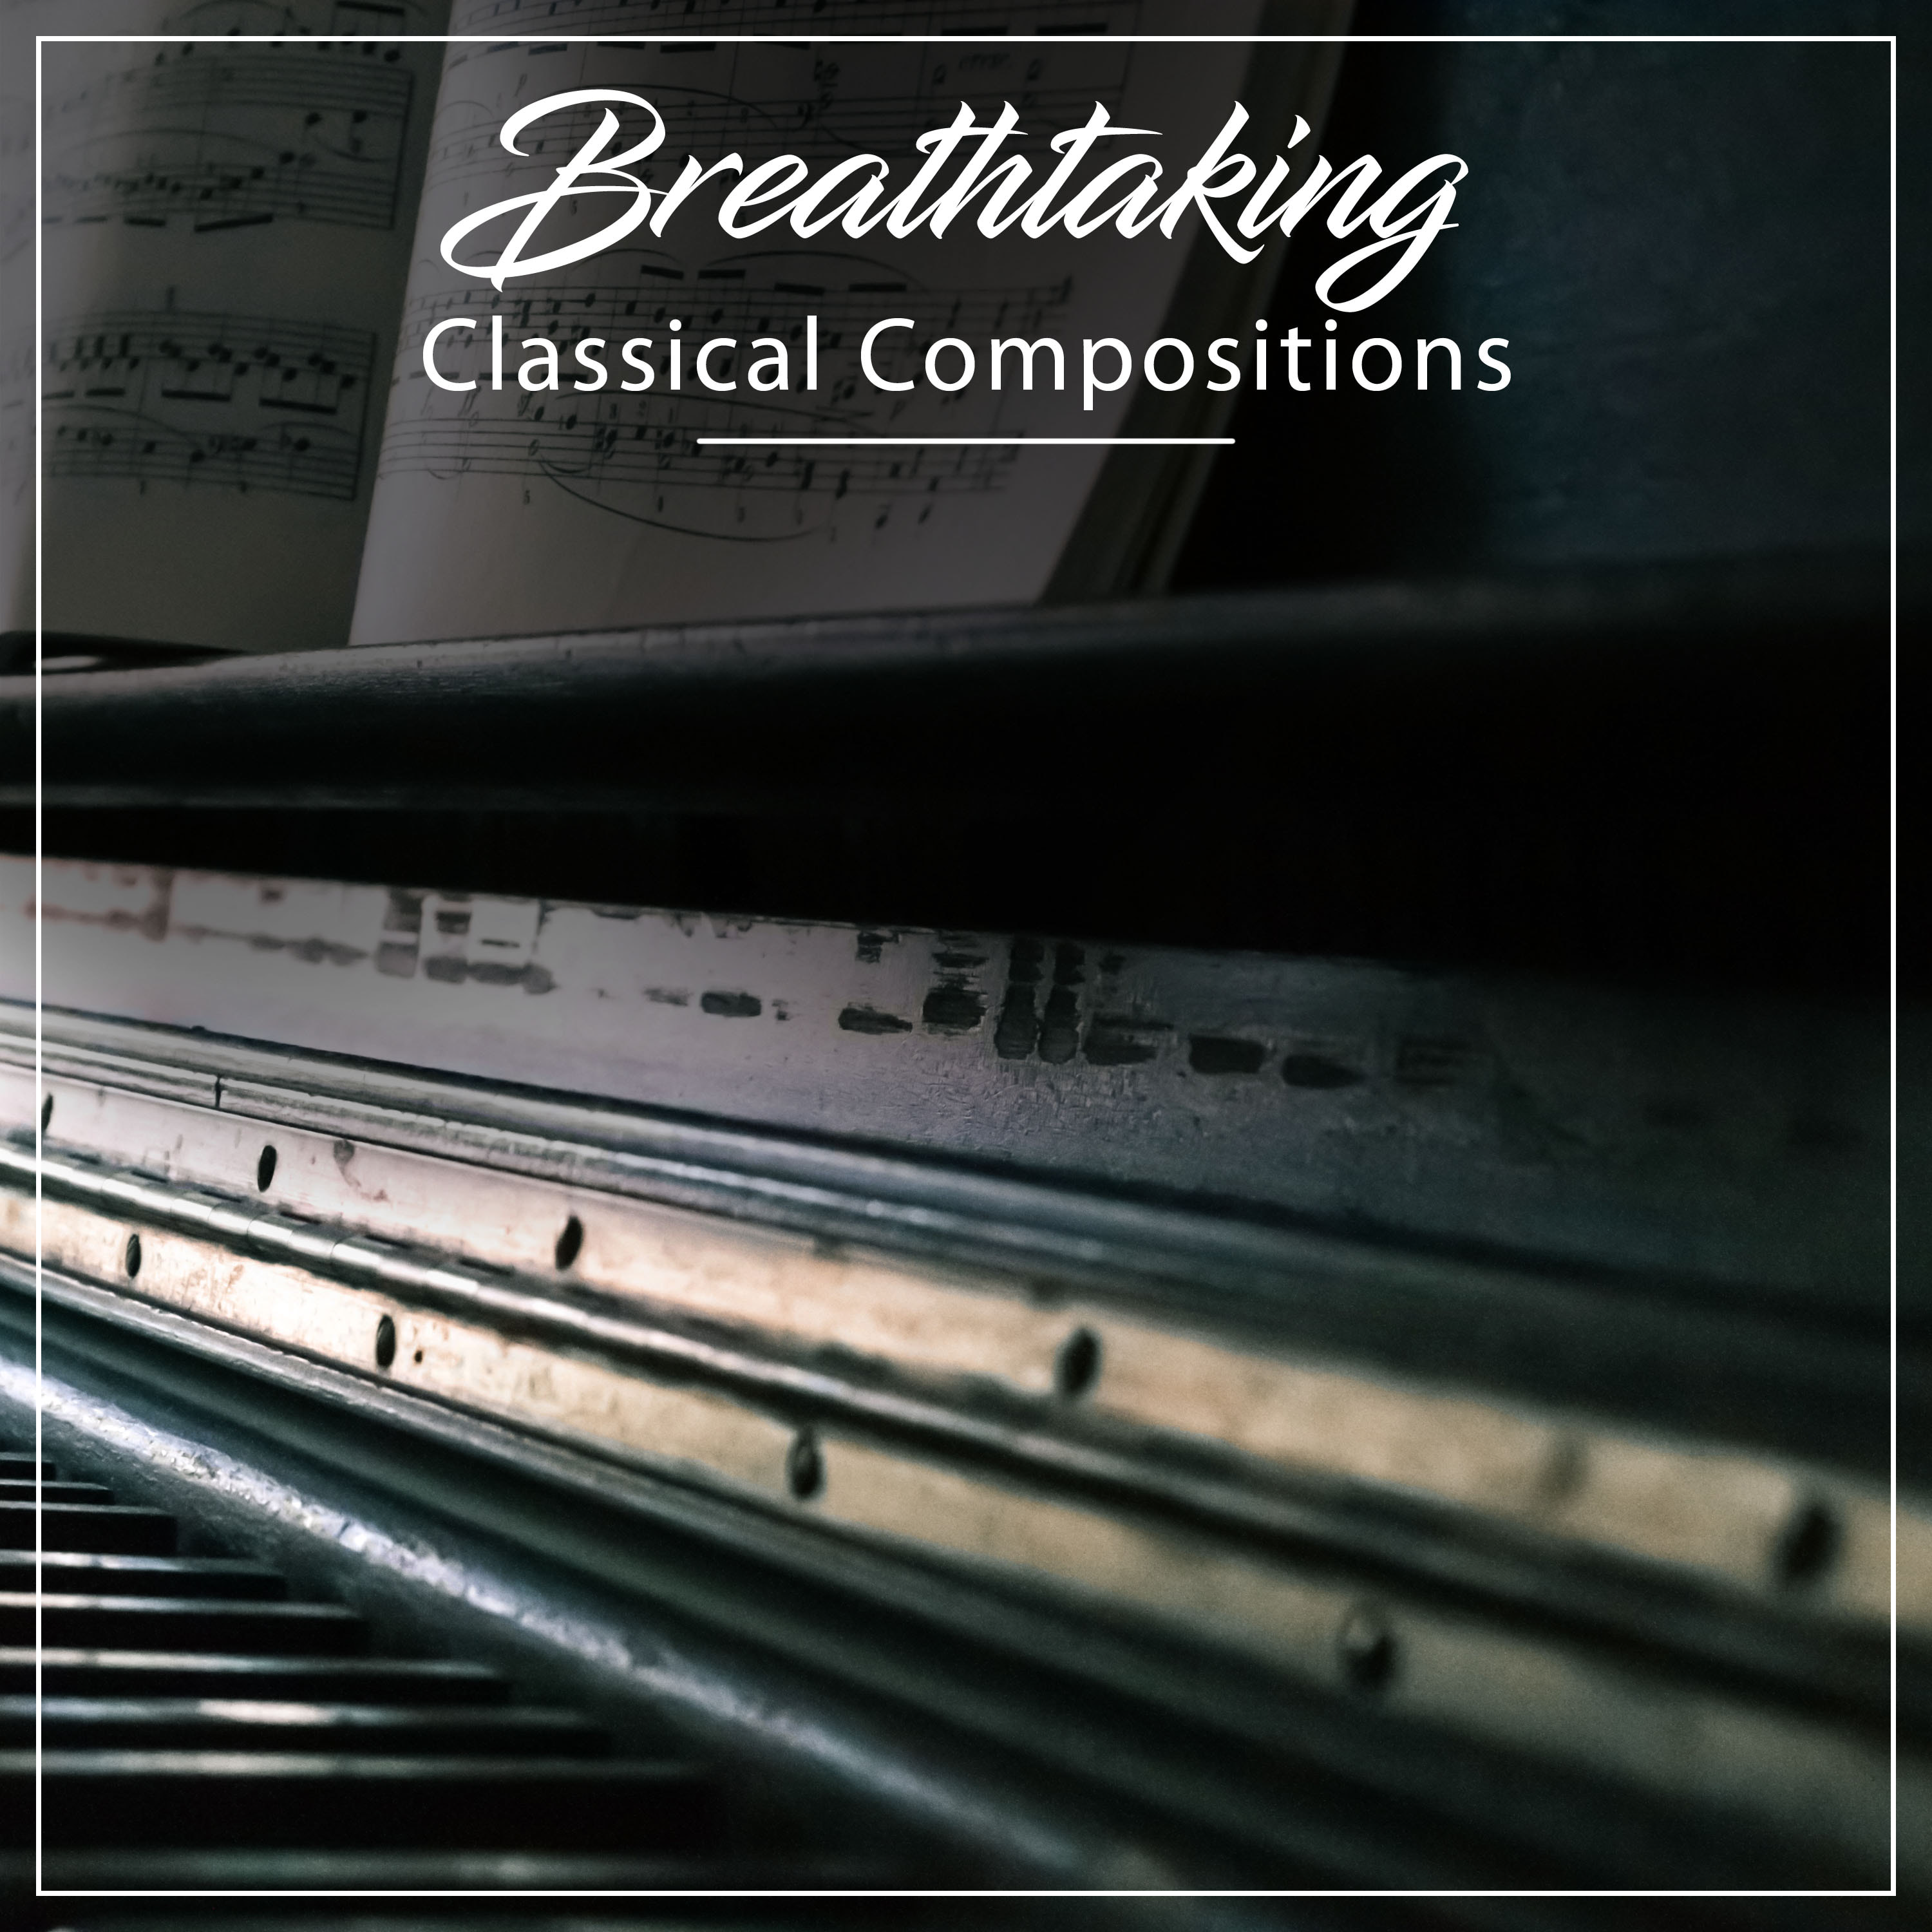 #12 Breathtaking Classical Compositions